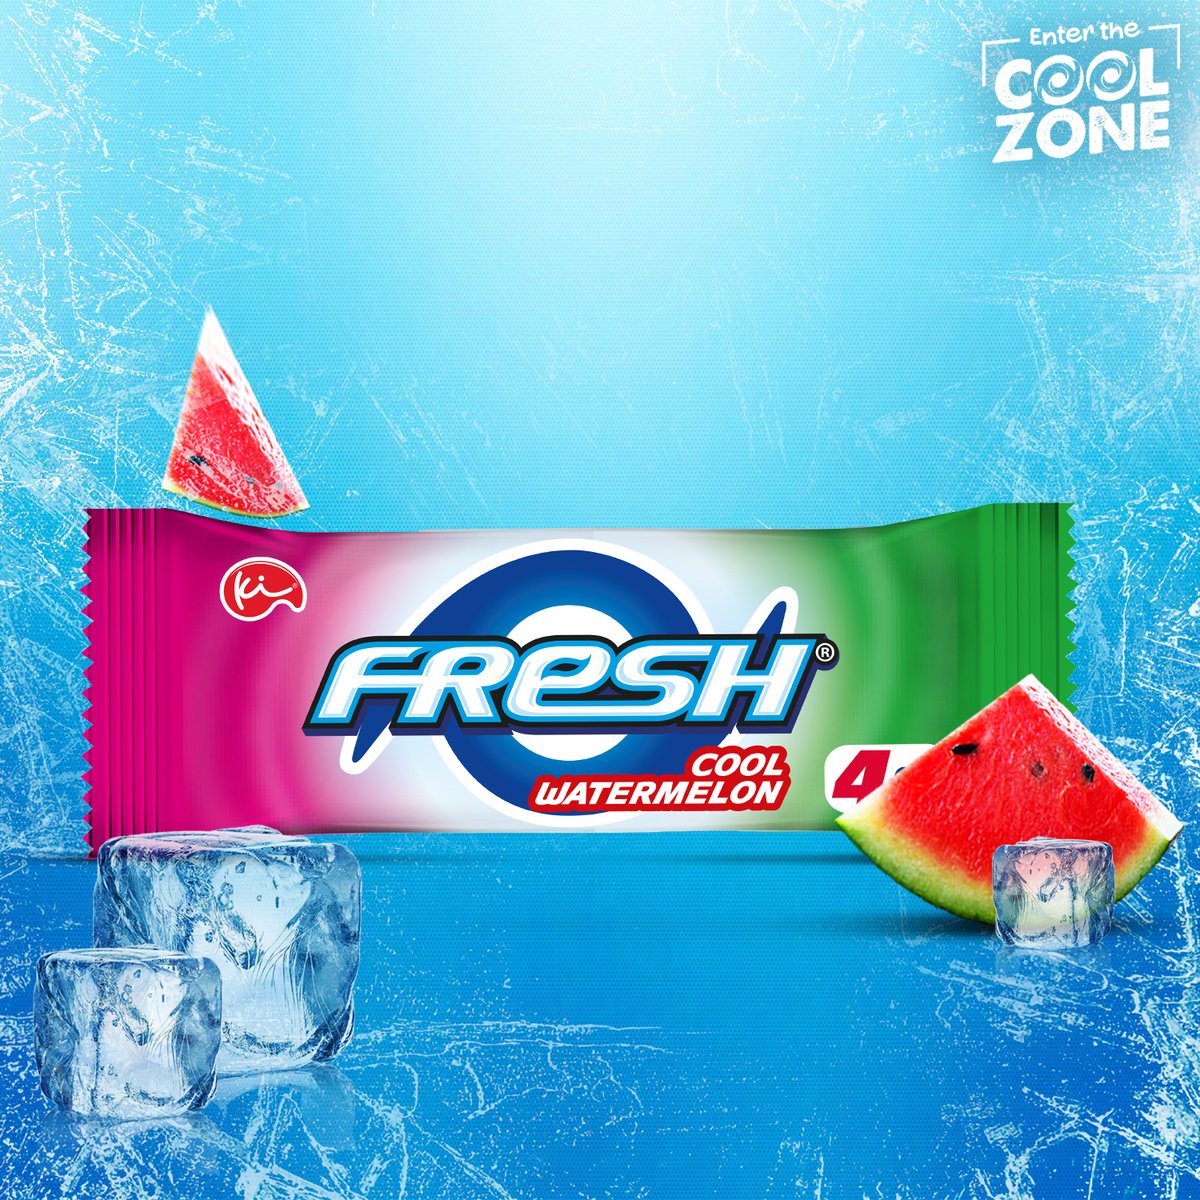 That feeling when you have your first chew of Fresh Watermelon… #bliss. #EnterTheCoolZone #FreshChewingGum